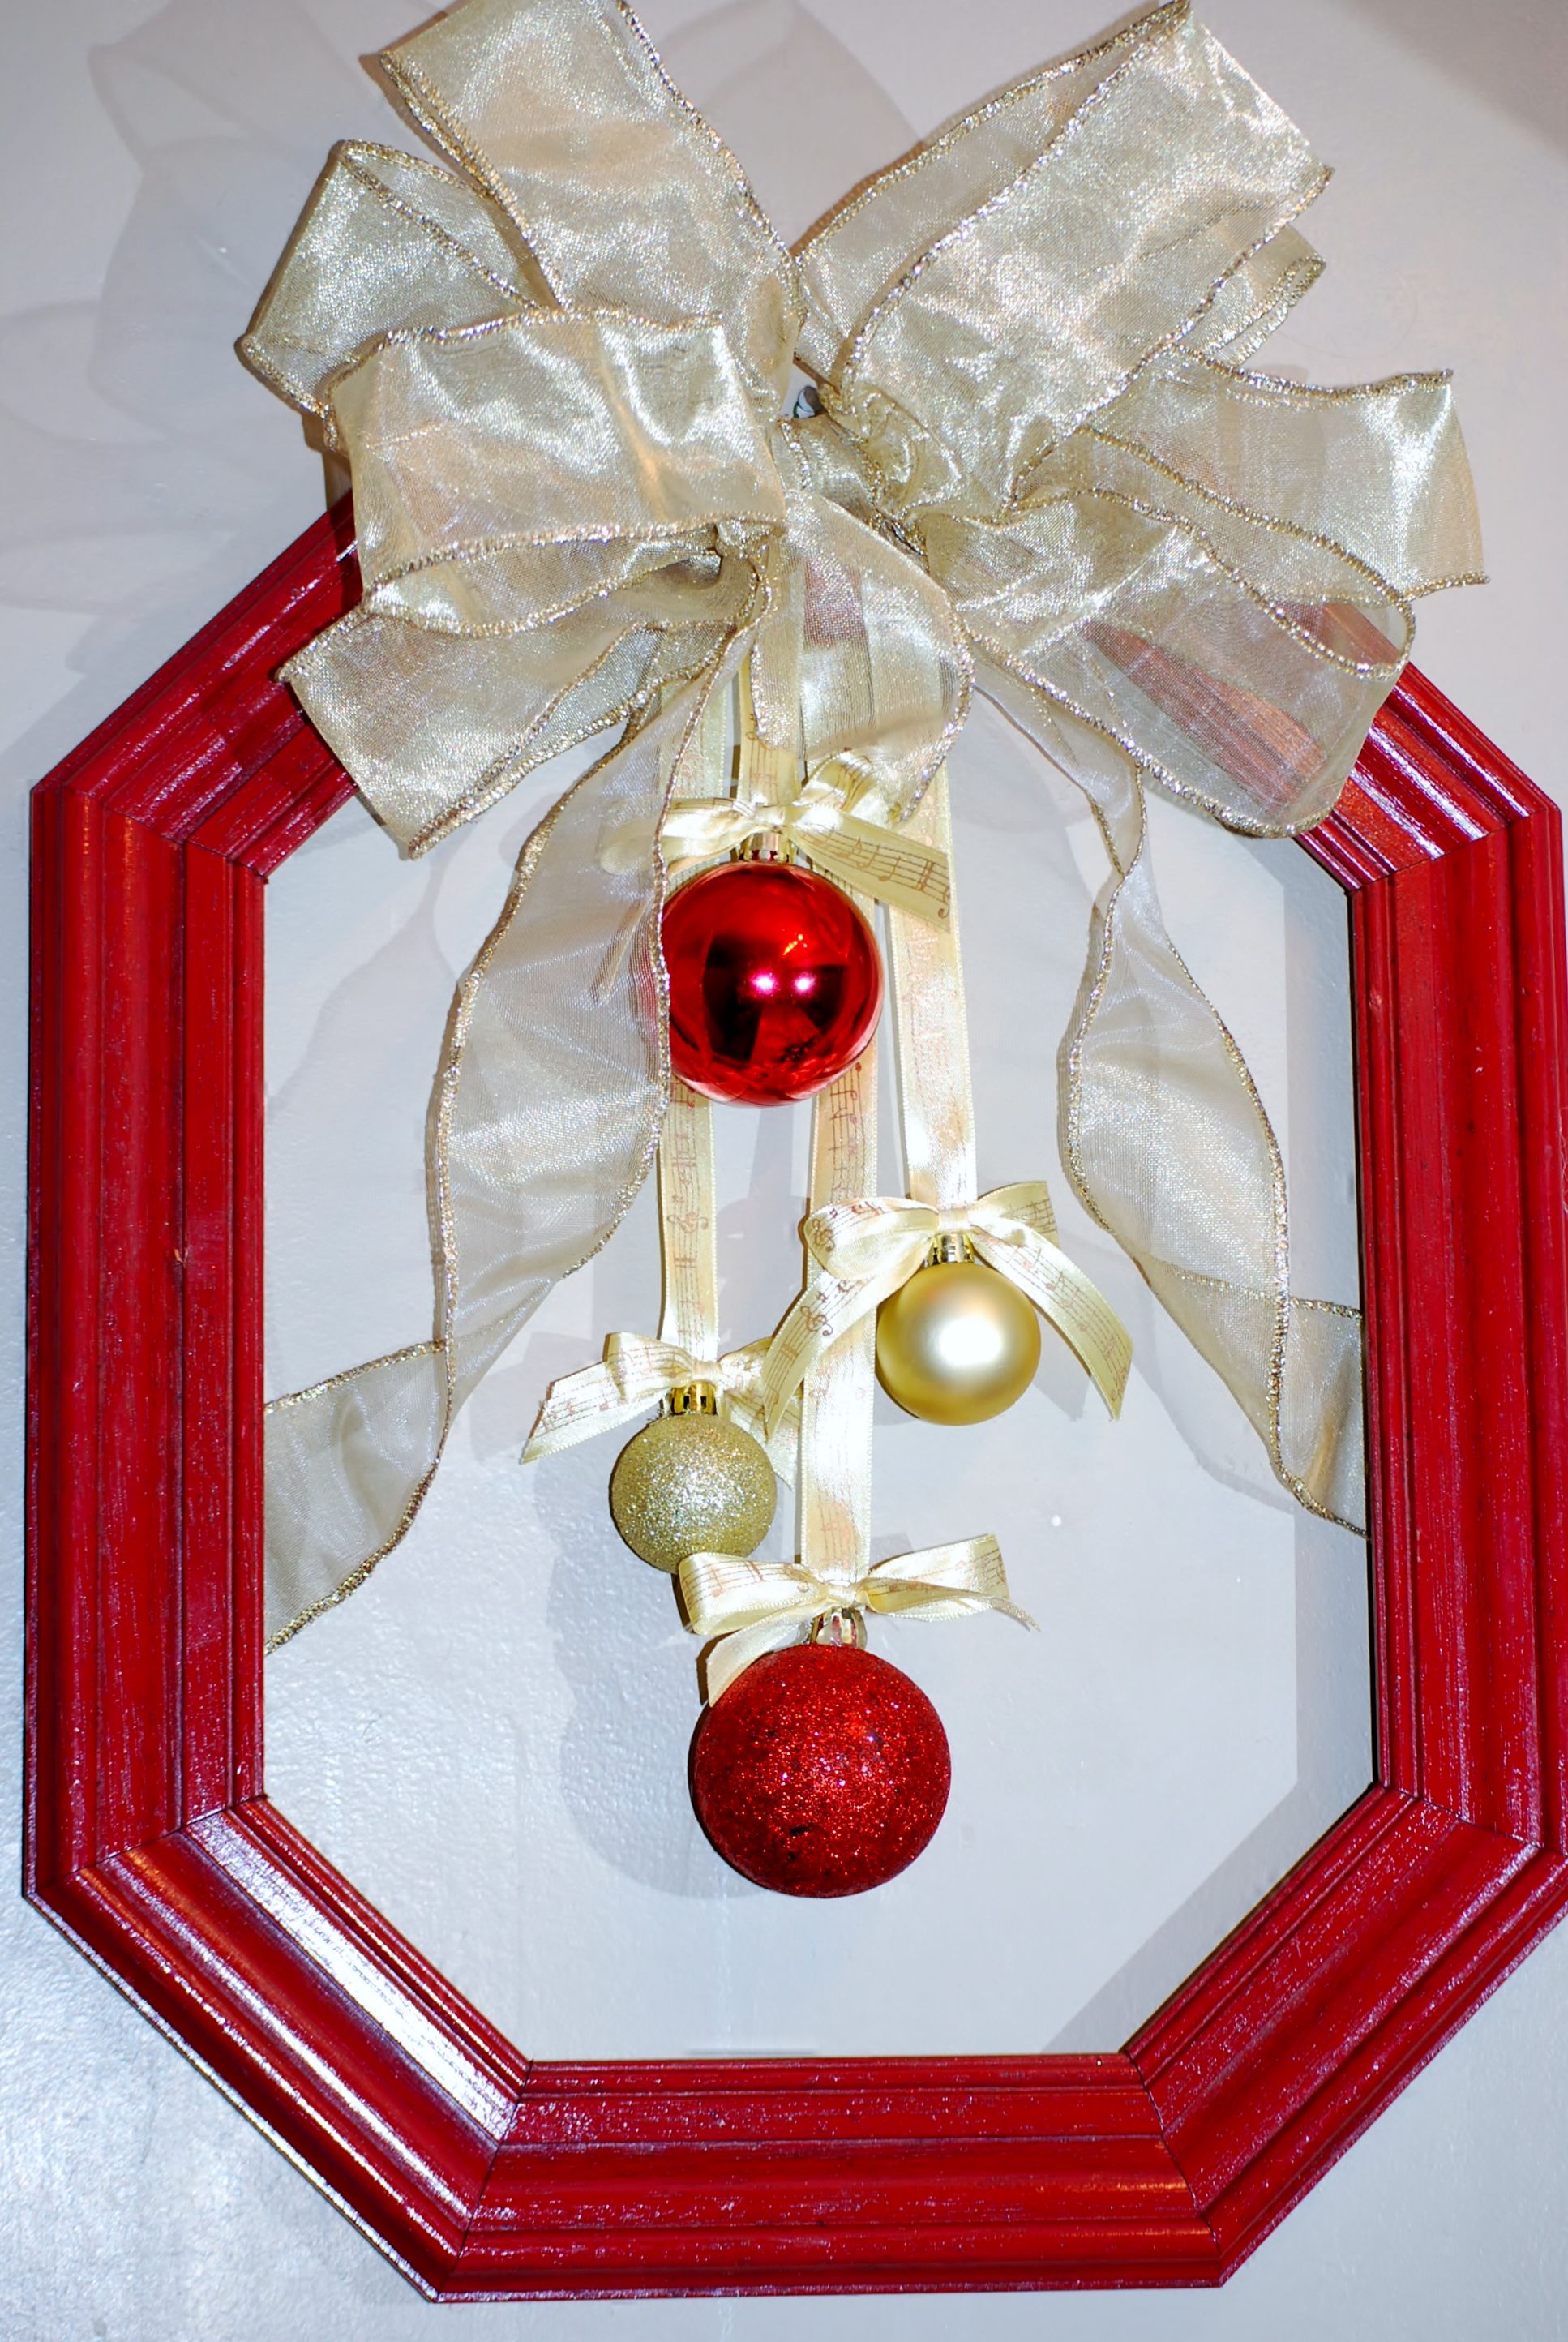 another Christmas project | crafts for kids | Pinterest | Craft and Xmas